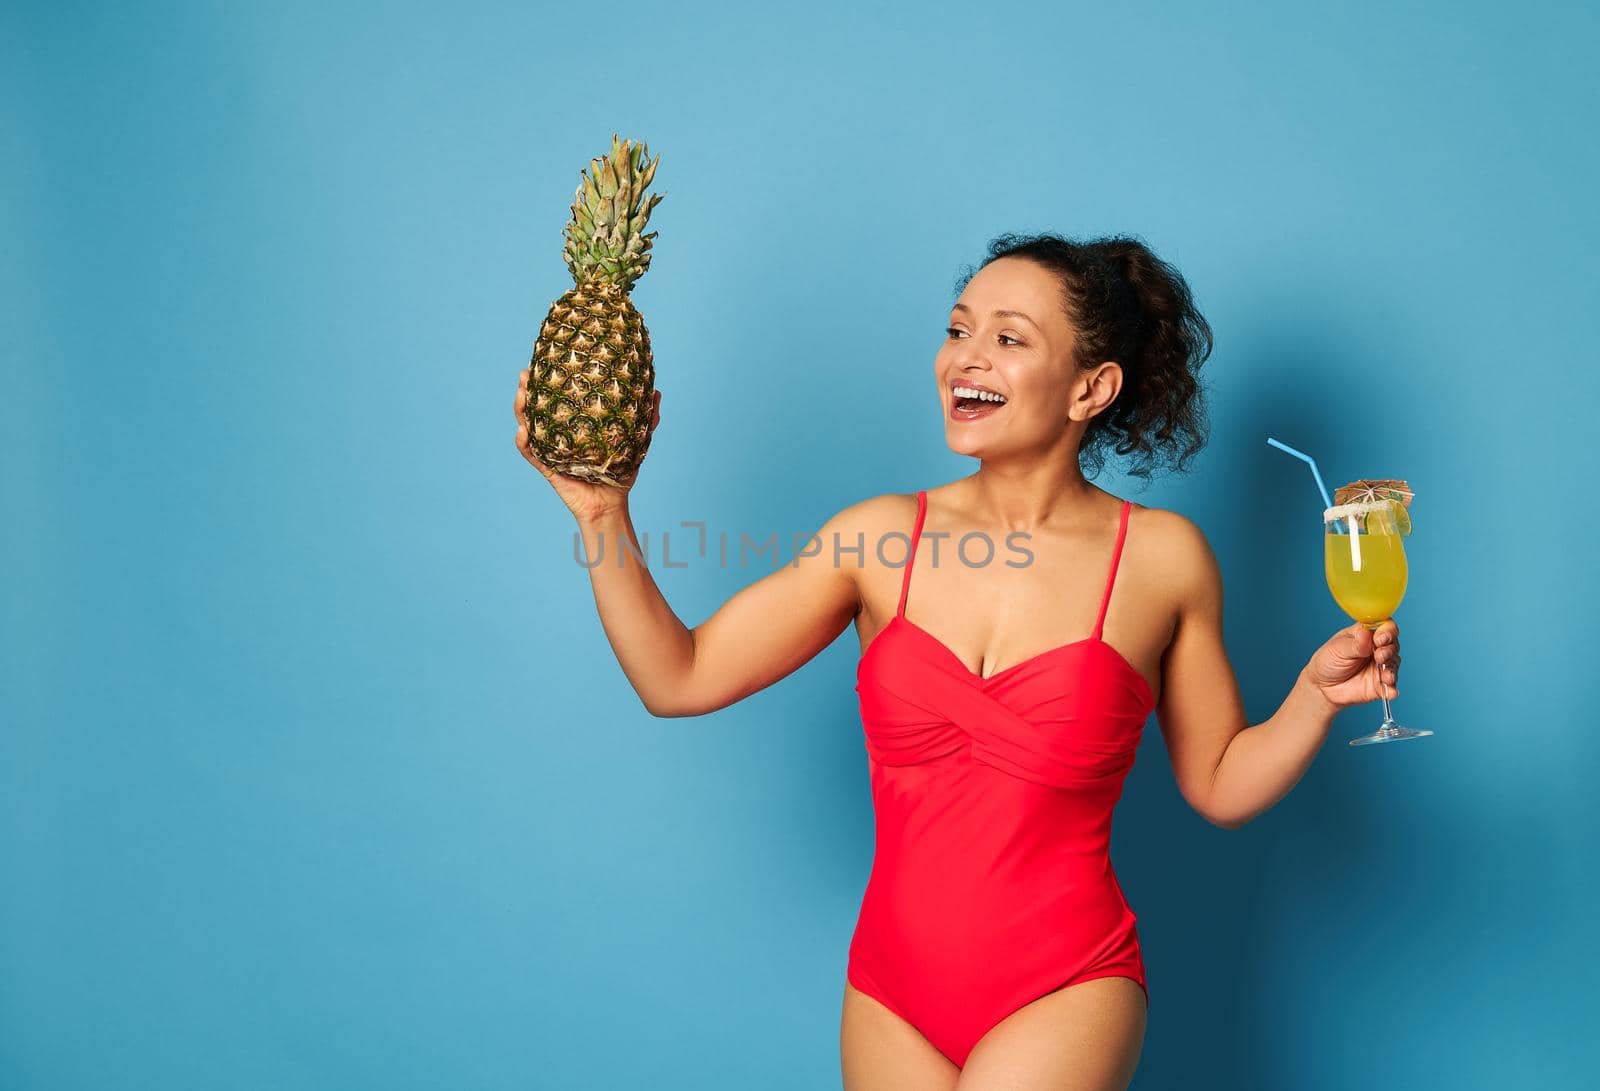 Muscular build woman in red swimsuit with a pineapple and cocktail in hands posing over blue background by artgf